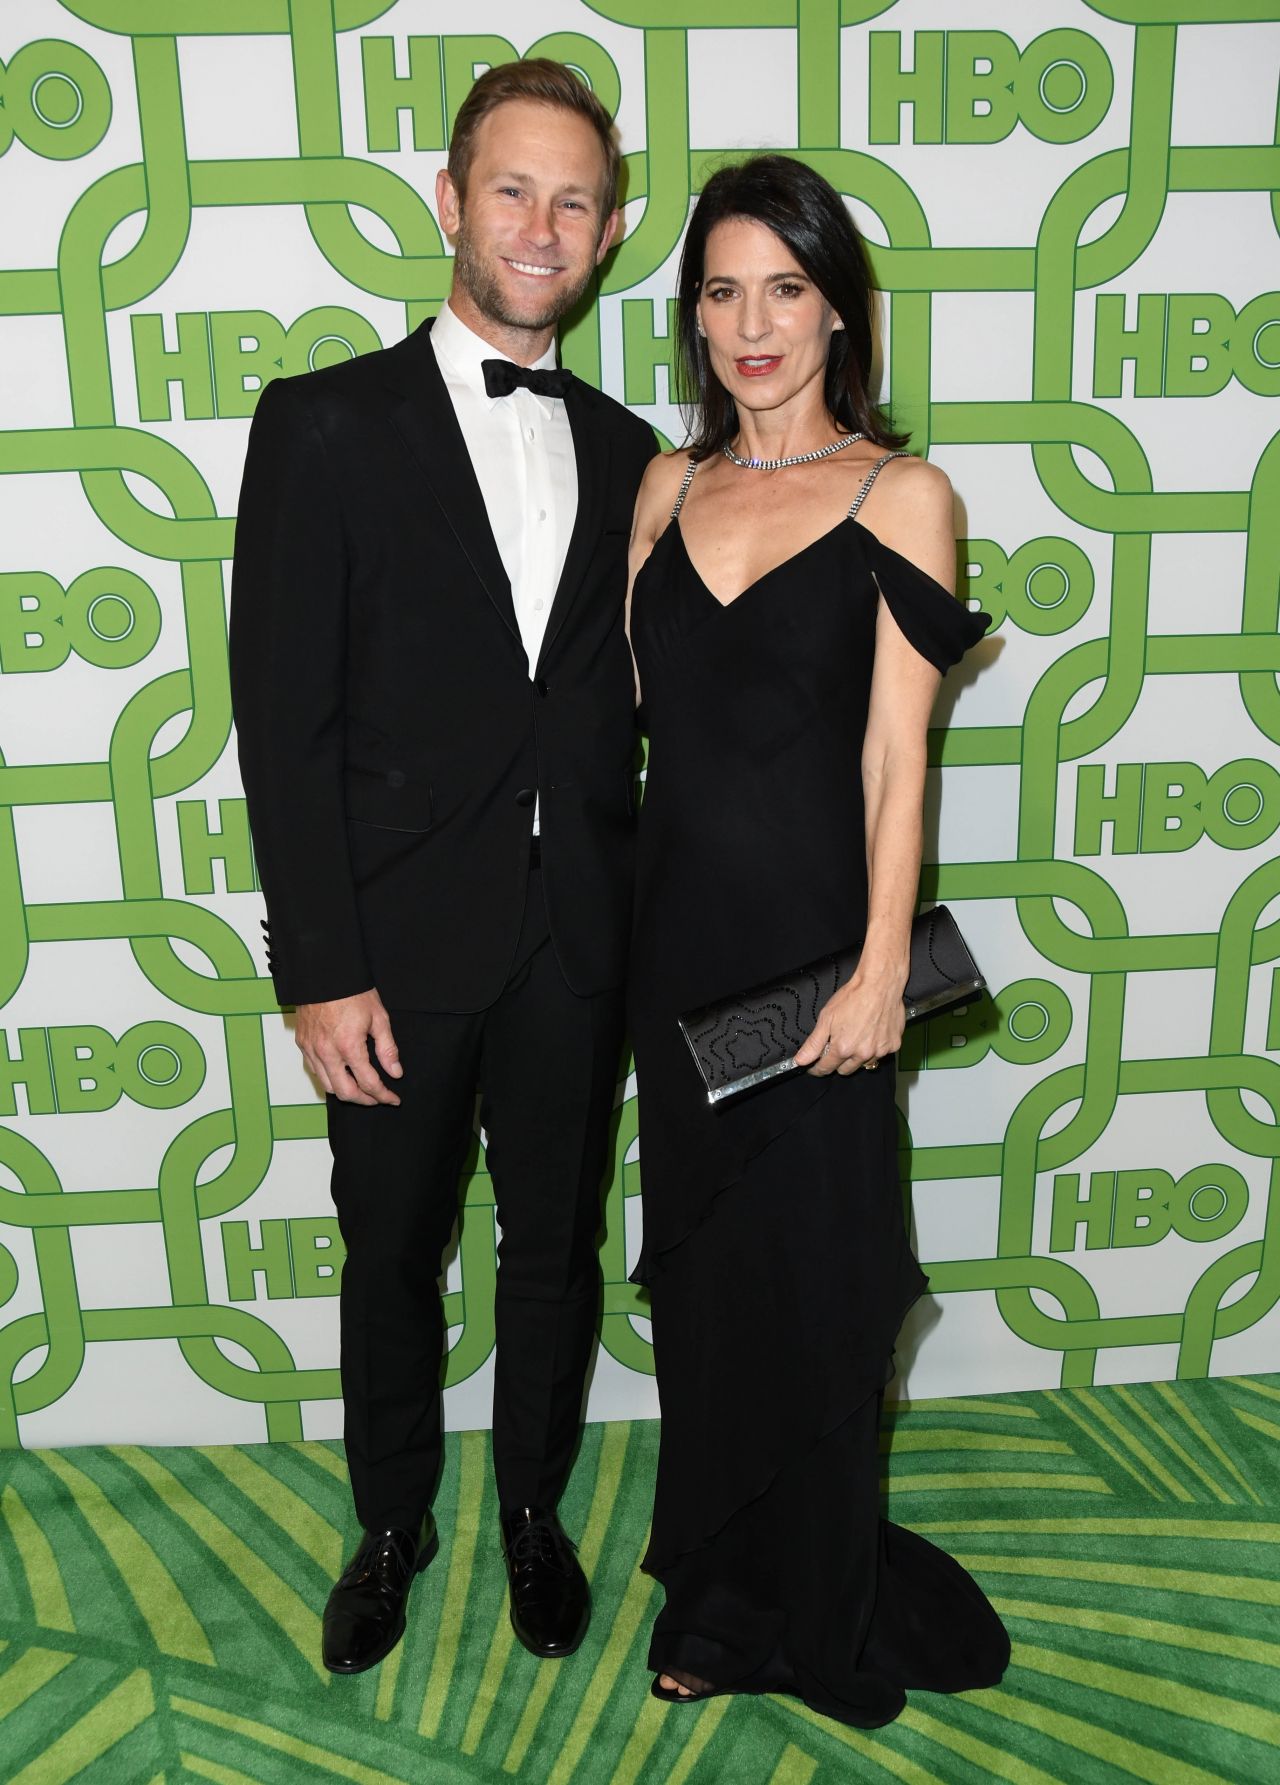 https://celebmafia.com/wp-content/uploads/2019/01/perrey-reeves-2019-hbo-official-golden-globe-awards-after-party-3.jpg